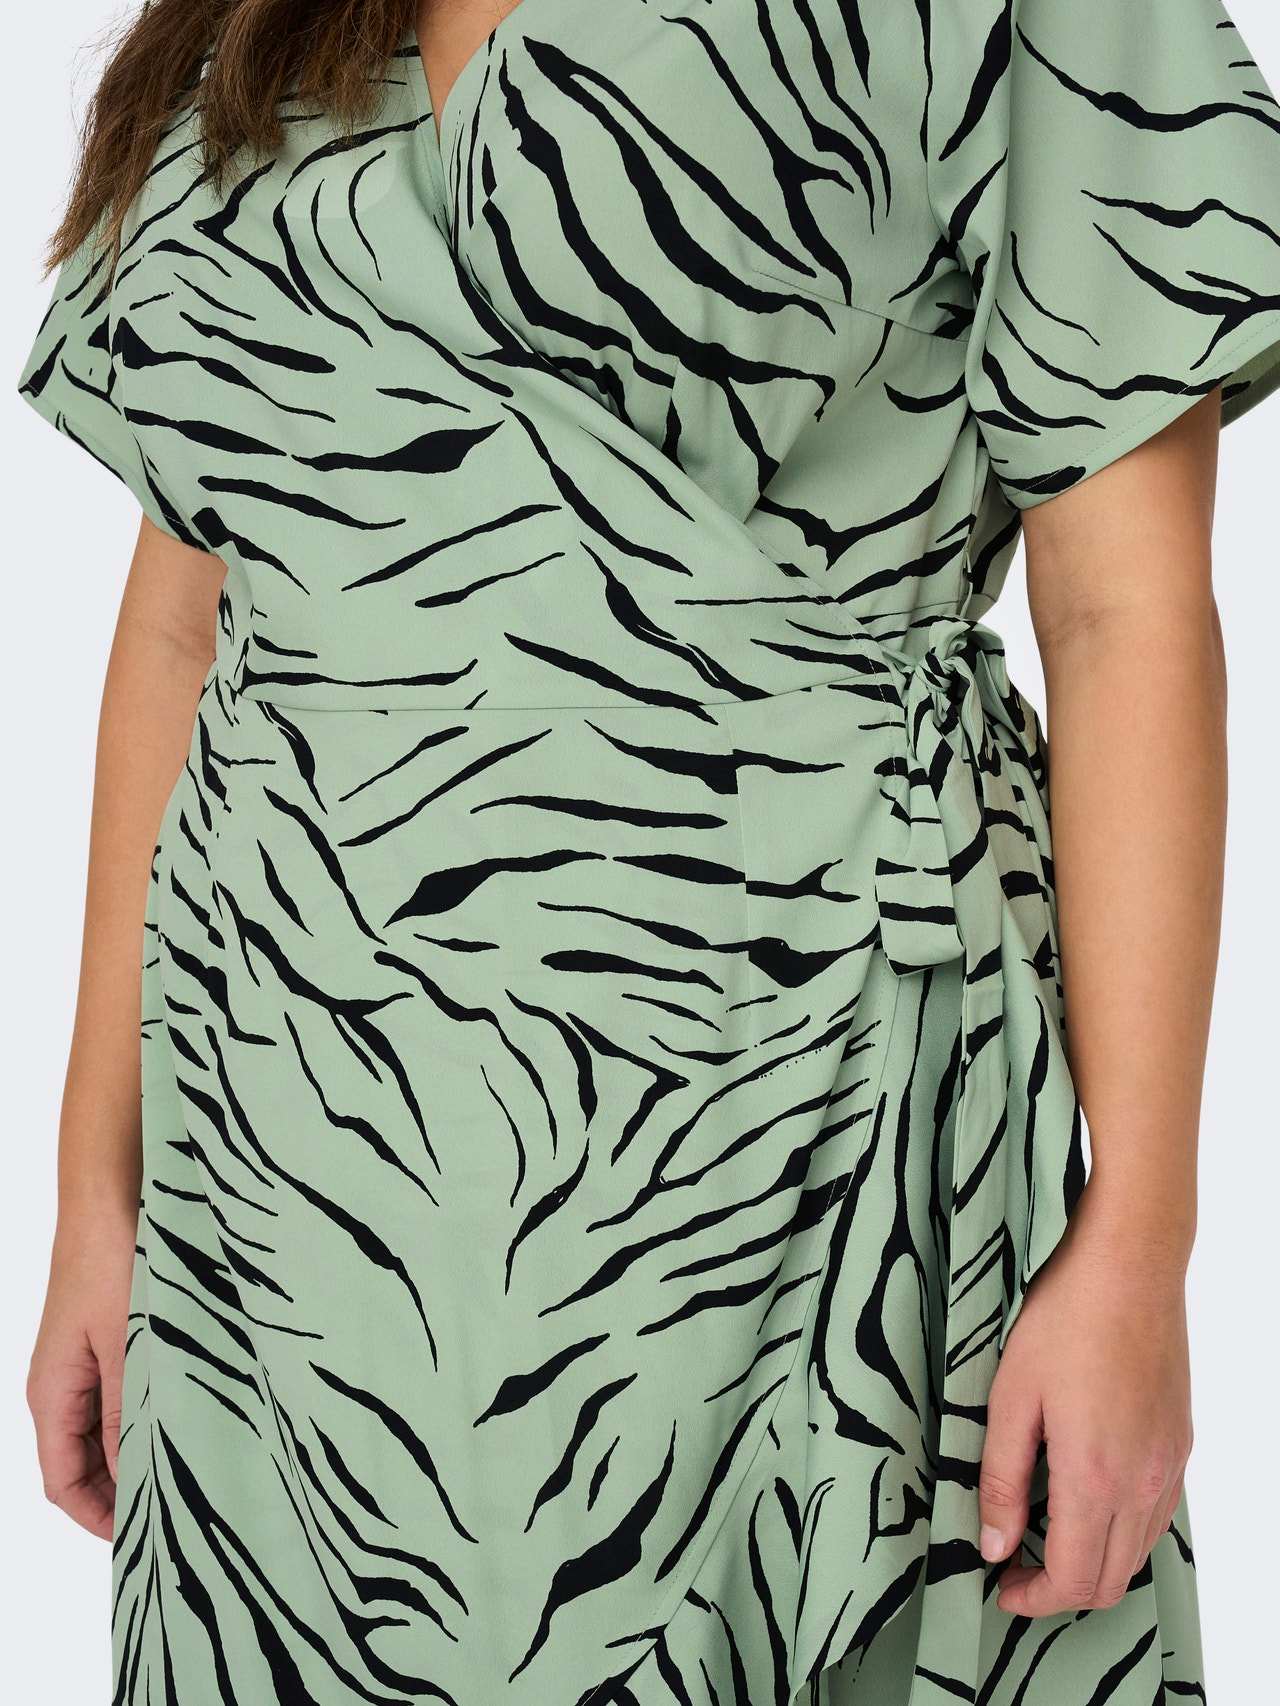 ONLY Curvy - Portefeuille Robe -Swamp - 15252210